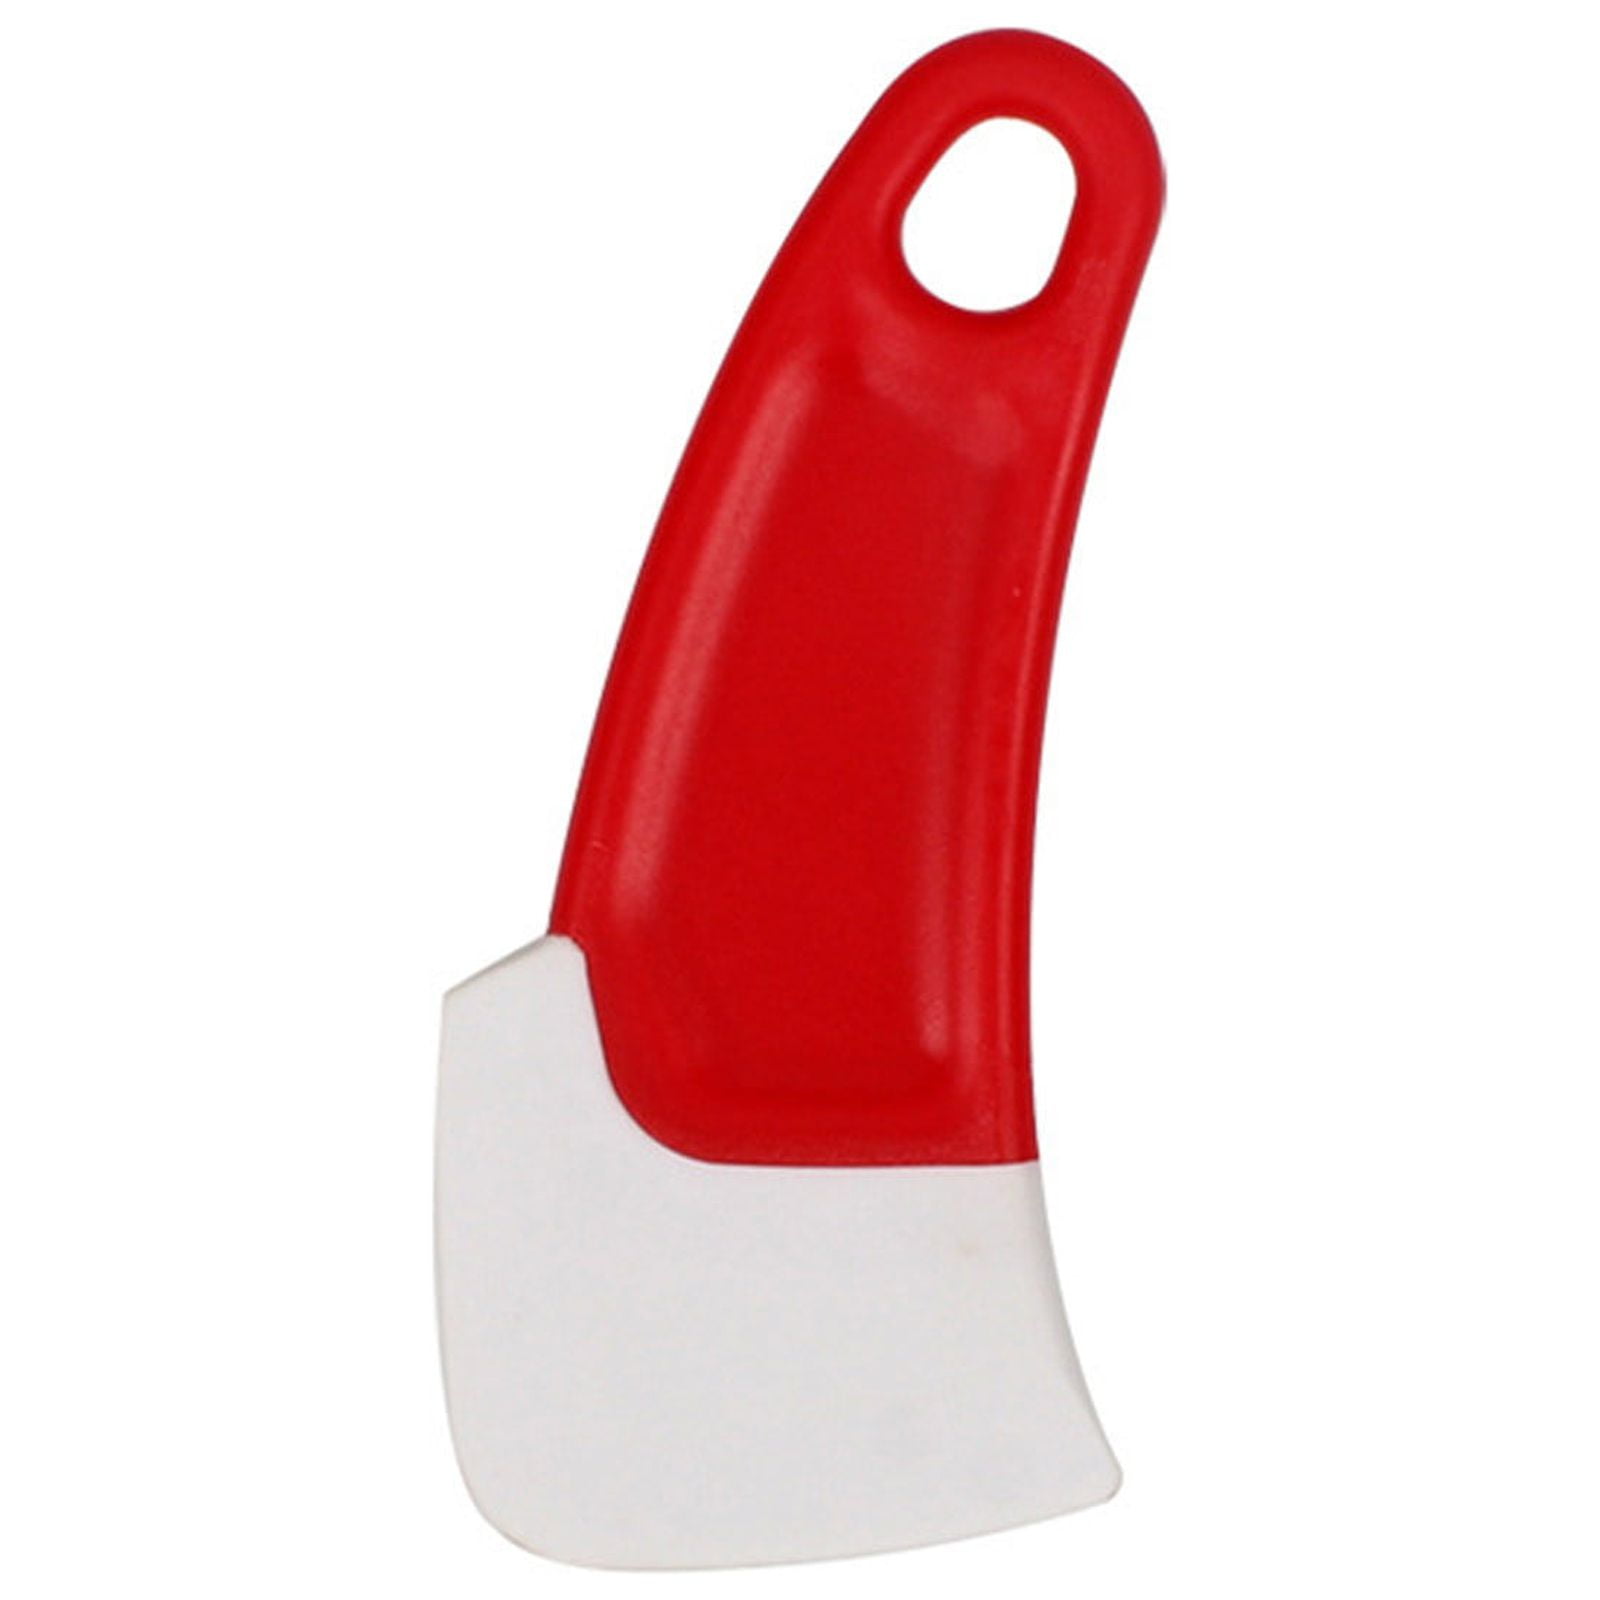 Honsva Silicone Pot Scraper to Kitchen Cleaning, Small Dish Scraper with  Hole for Pans, Pots, Non-st…See more Honsva Silicone Pot Scraper to Kitchen